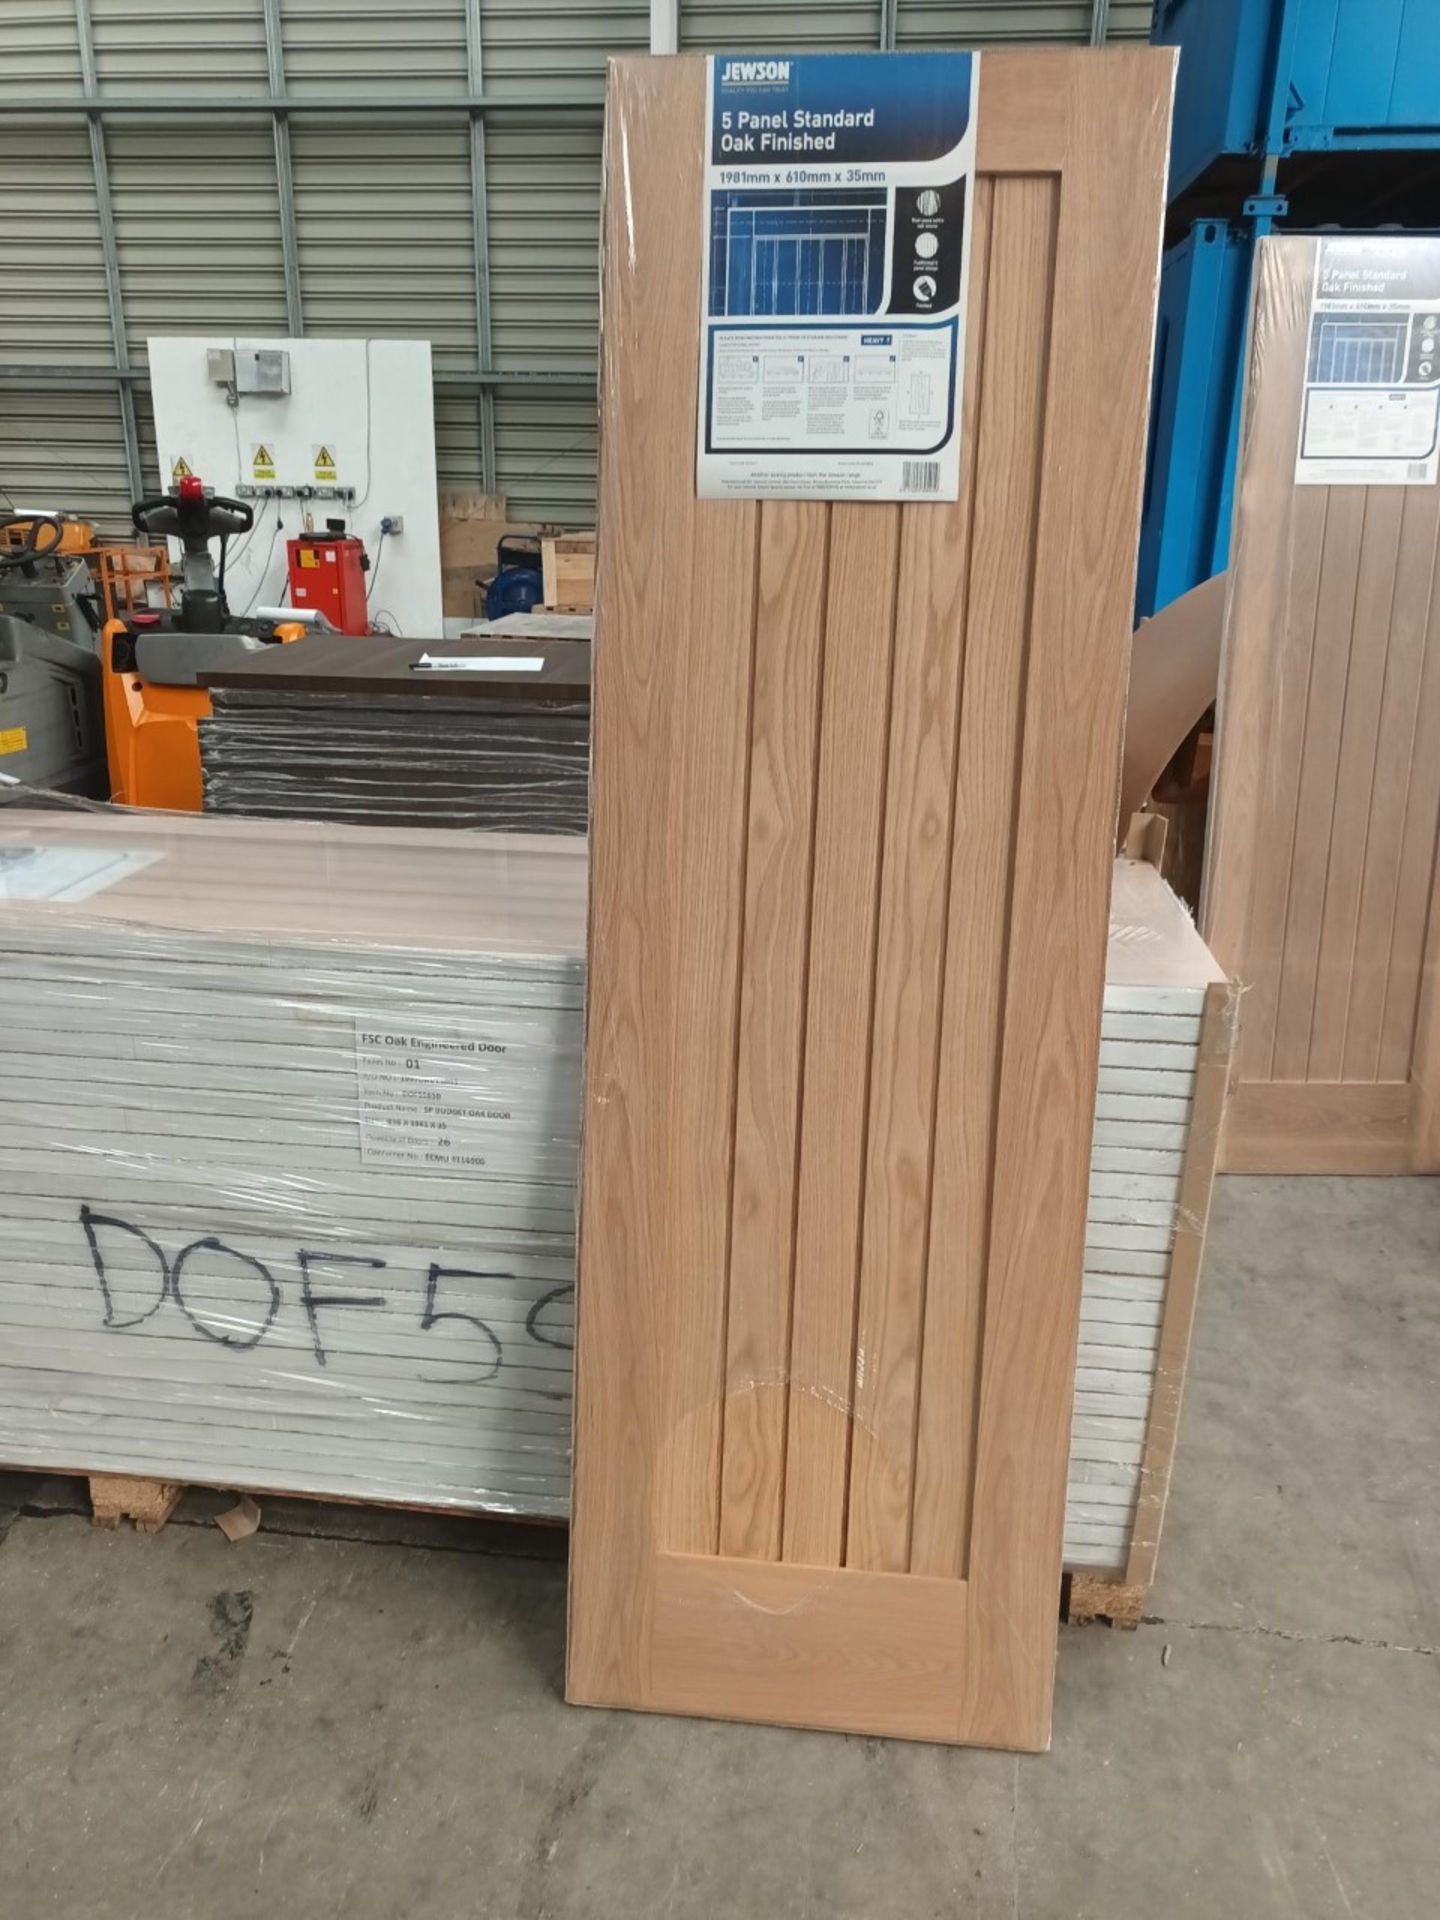 PALLET LOT 26 X NEW PACKAGED 5 PANEL OAK FINISHED DOORS. RRP £228 EACH, GIVING THIS LOT A TOTAL